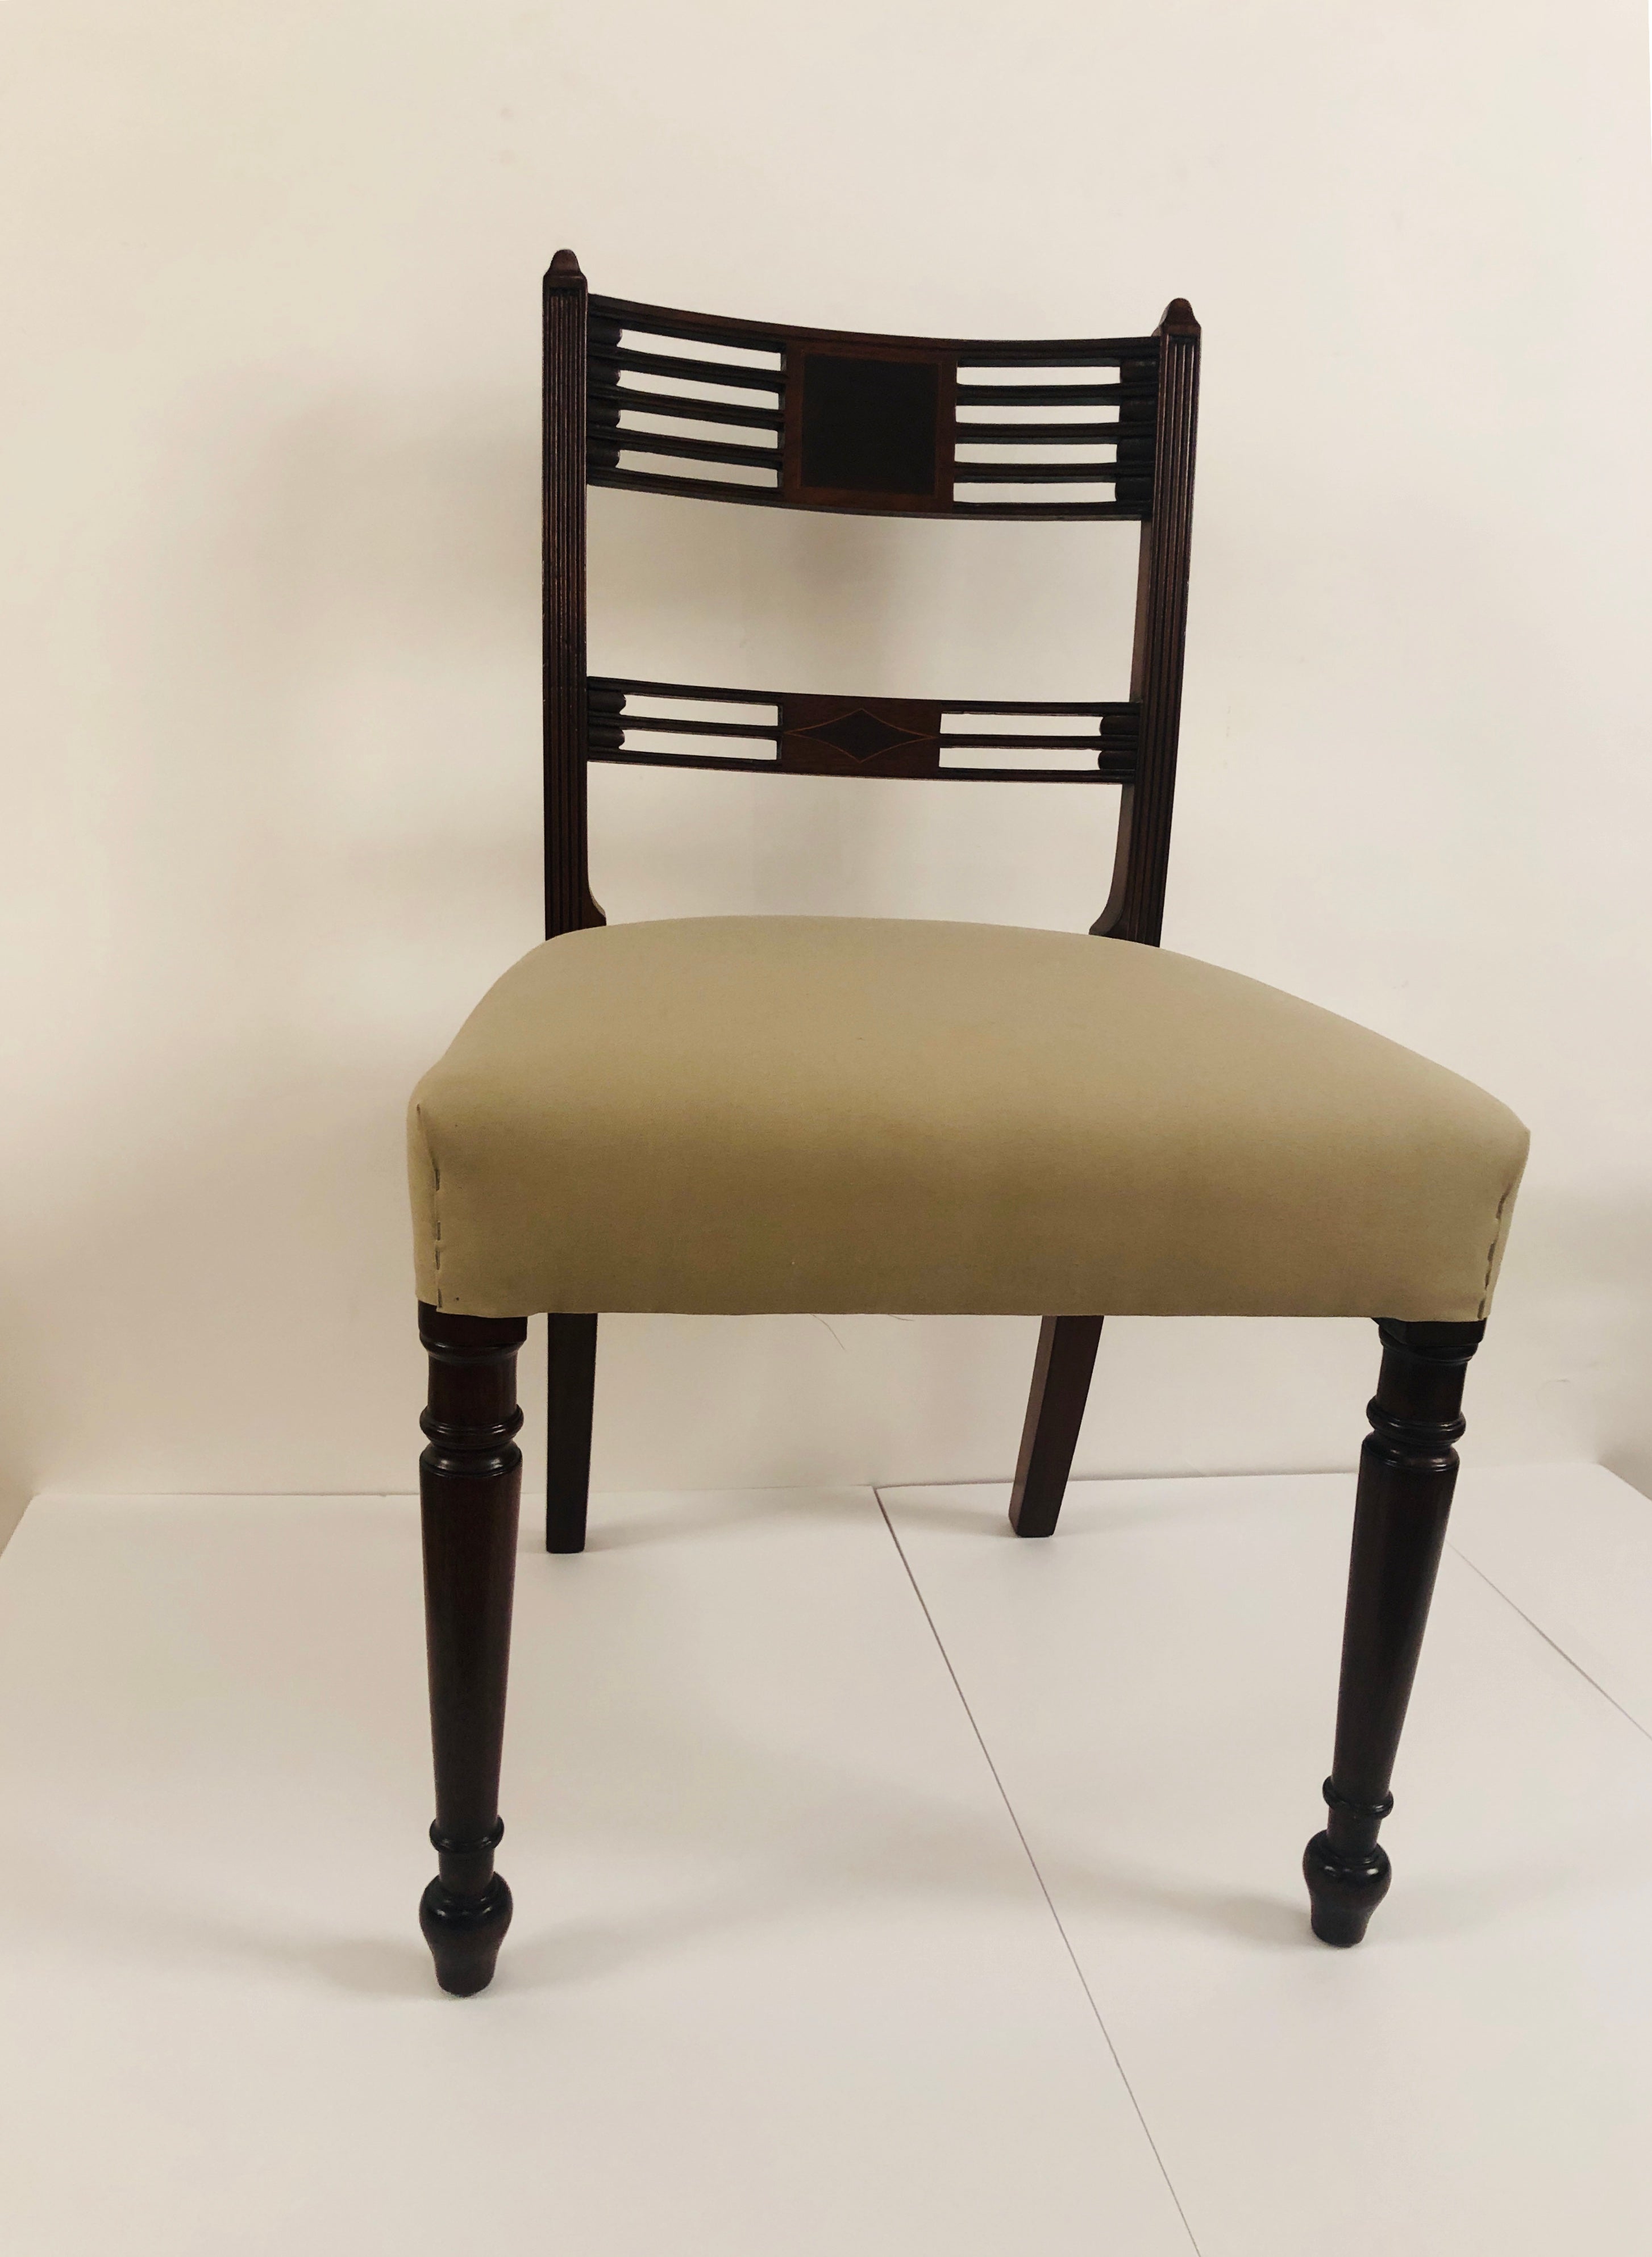 2 Regency Style Dining Chairs (price per chair)